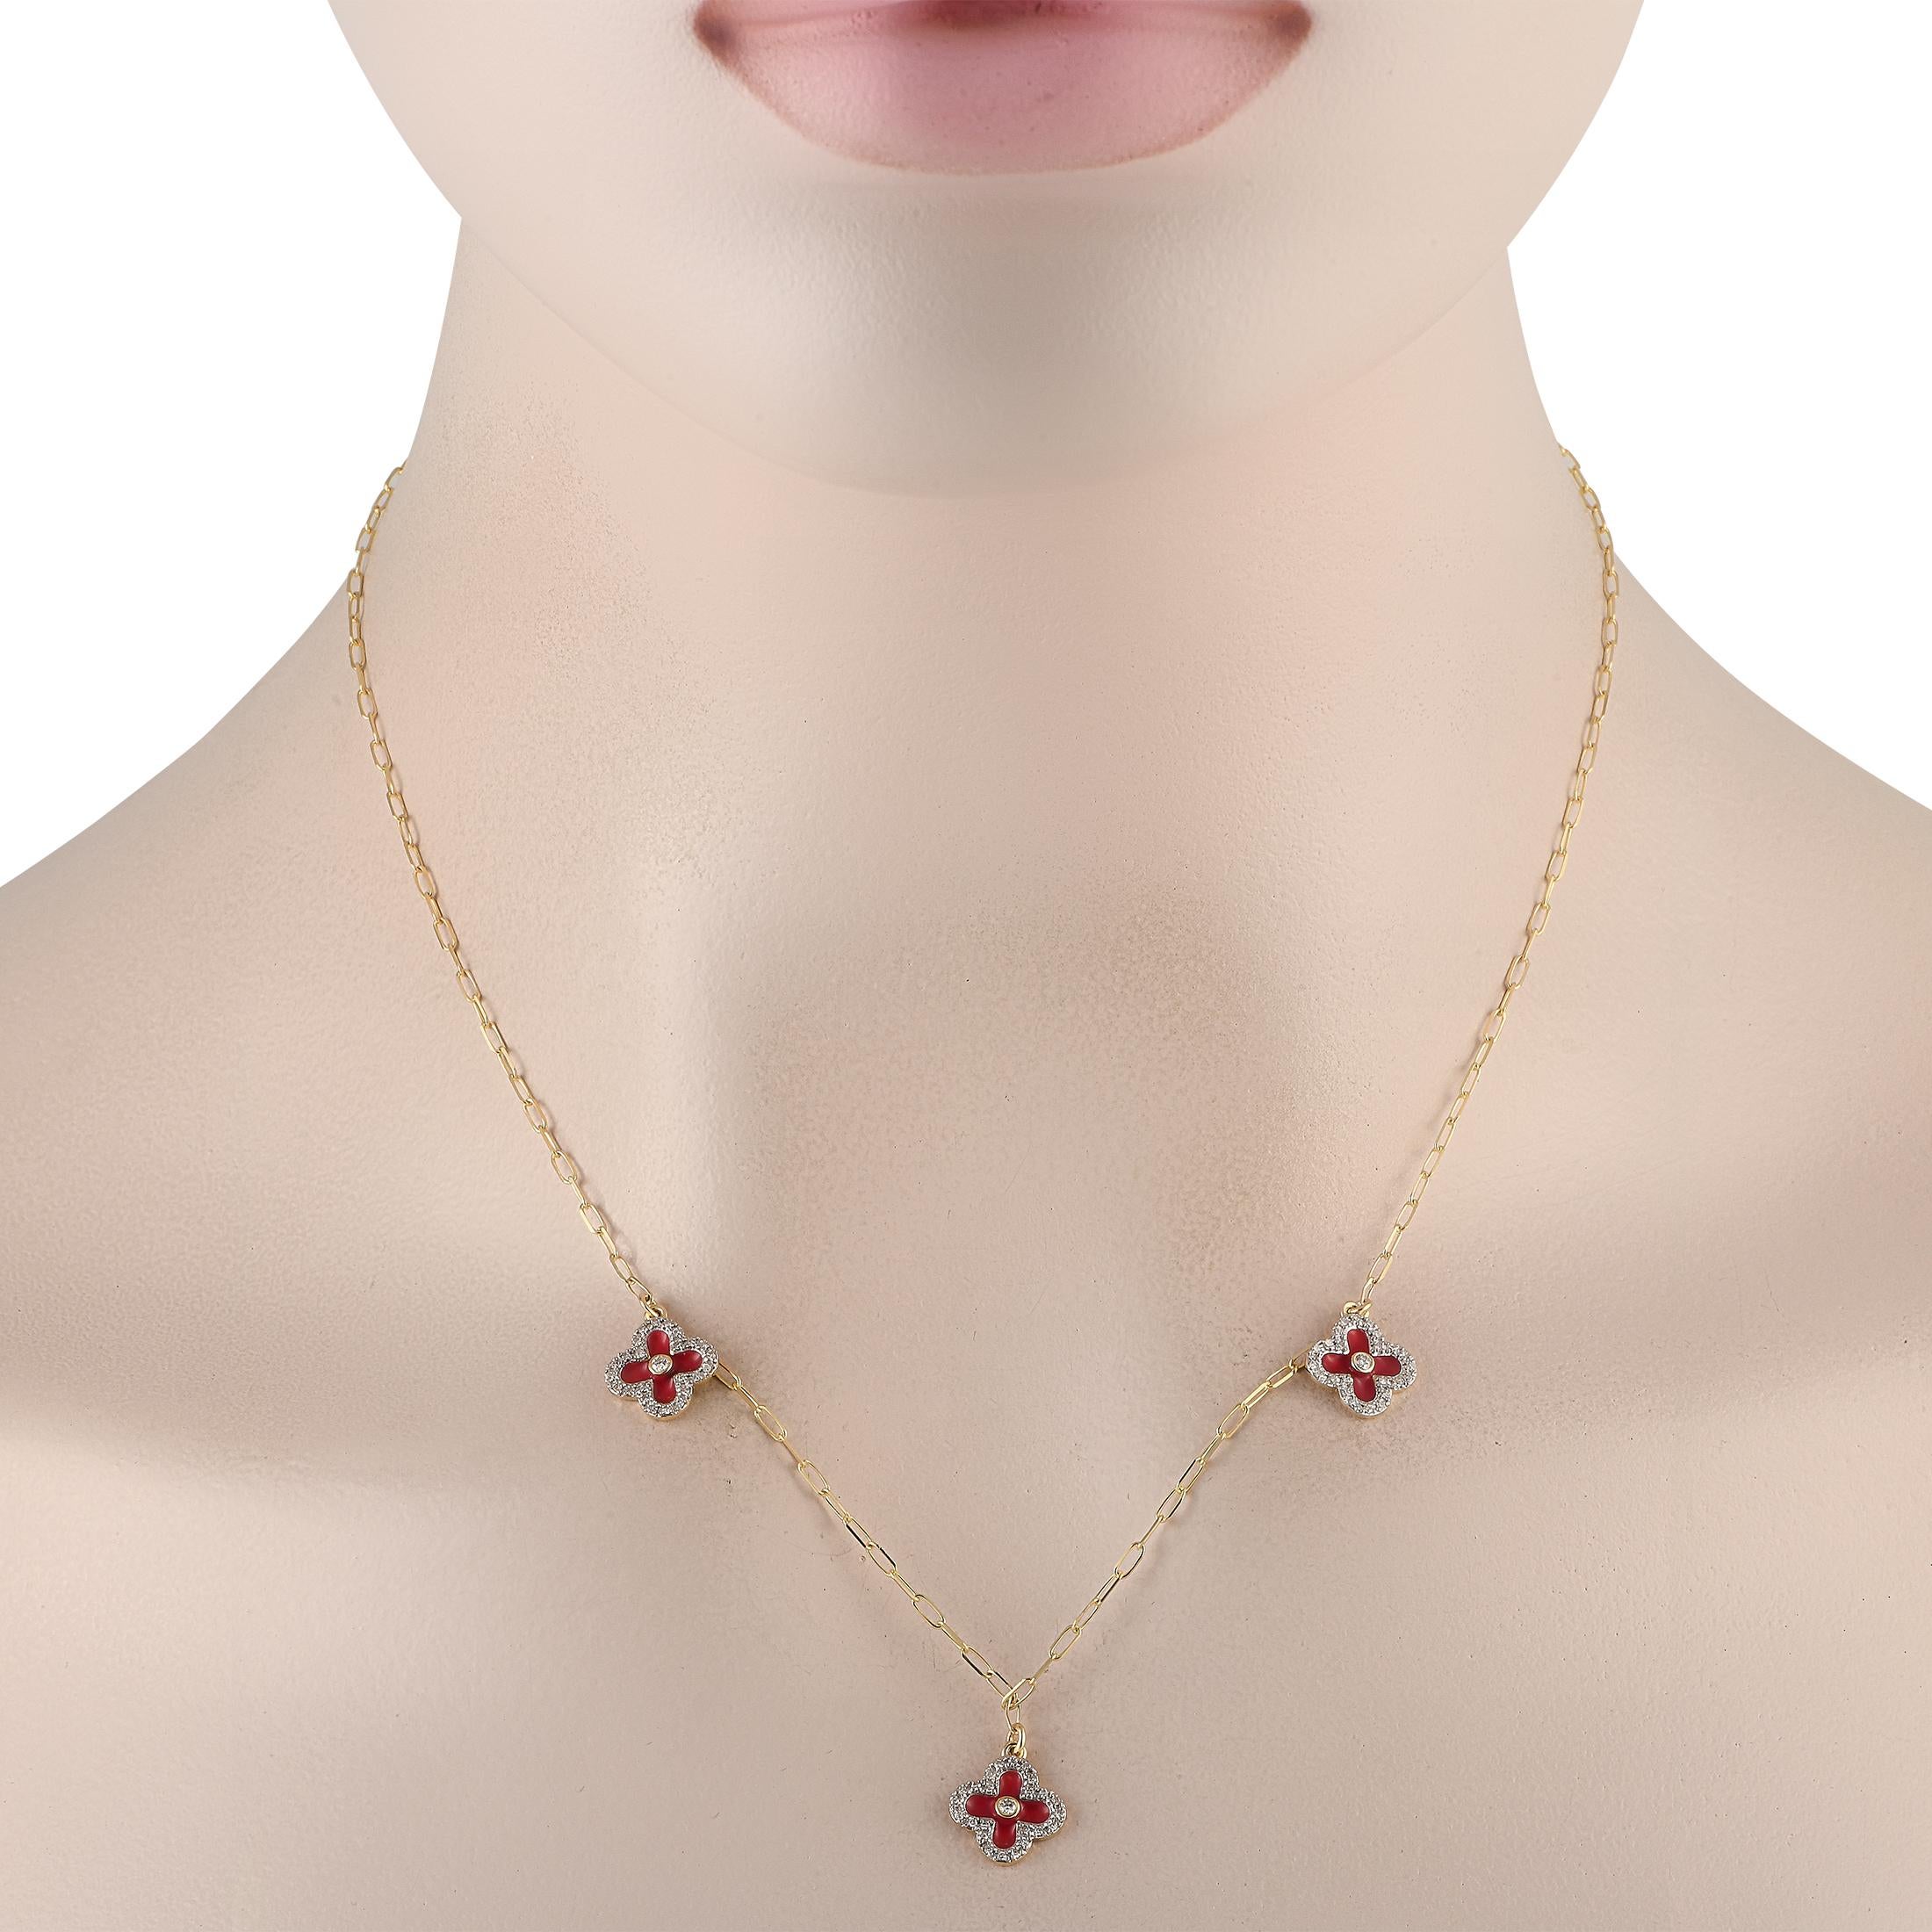 A trio of red clover-shaped motifs sparkle and shine thanks to sparkling Diamonds with a total wight of 0.25 carats on this impeccably crafted necklace. Charming and incredibly elegant in design, each pendant is crafted from 14K Yellow Gold and